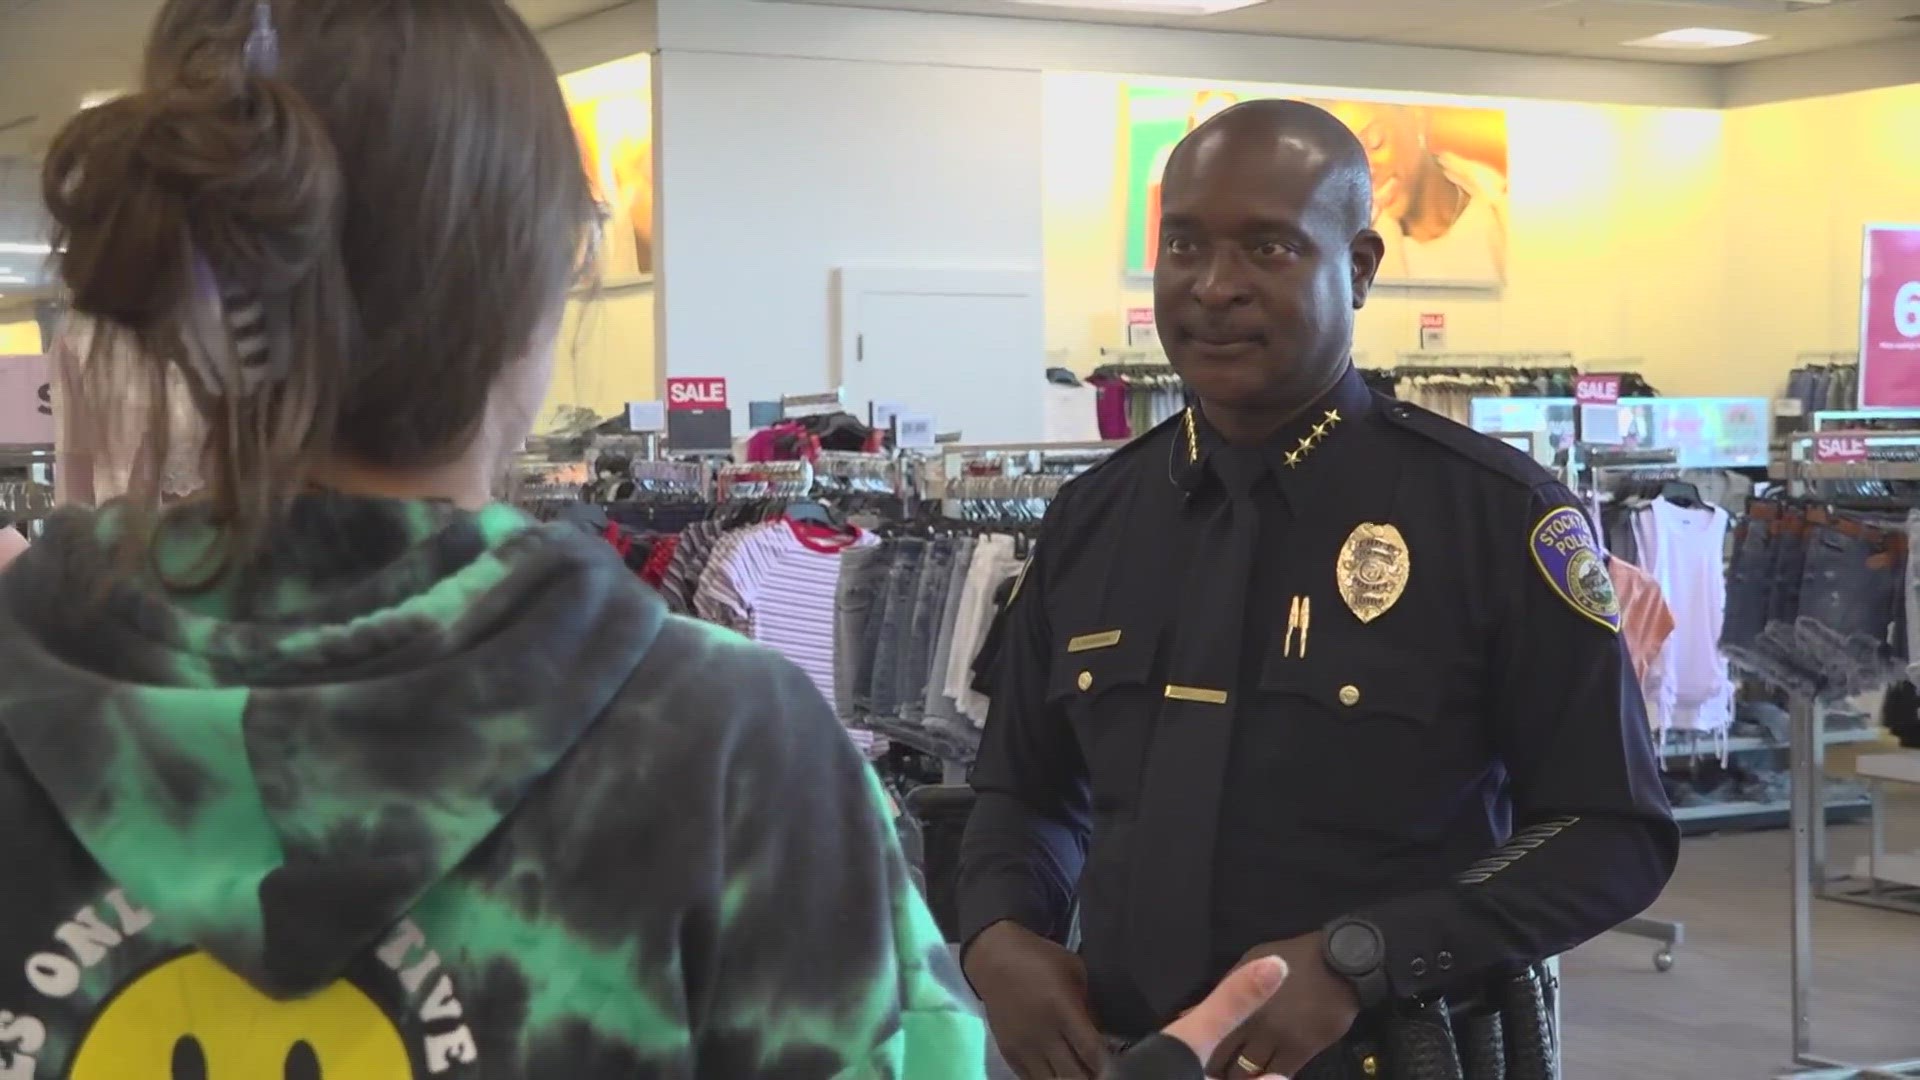 Stockton Police Chief focuses on retail theft during a community walk.